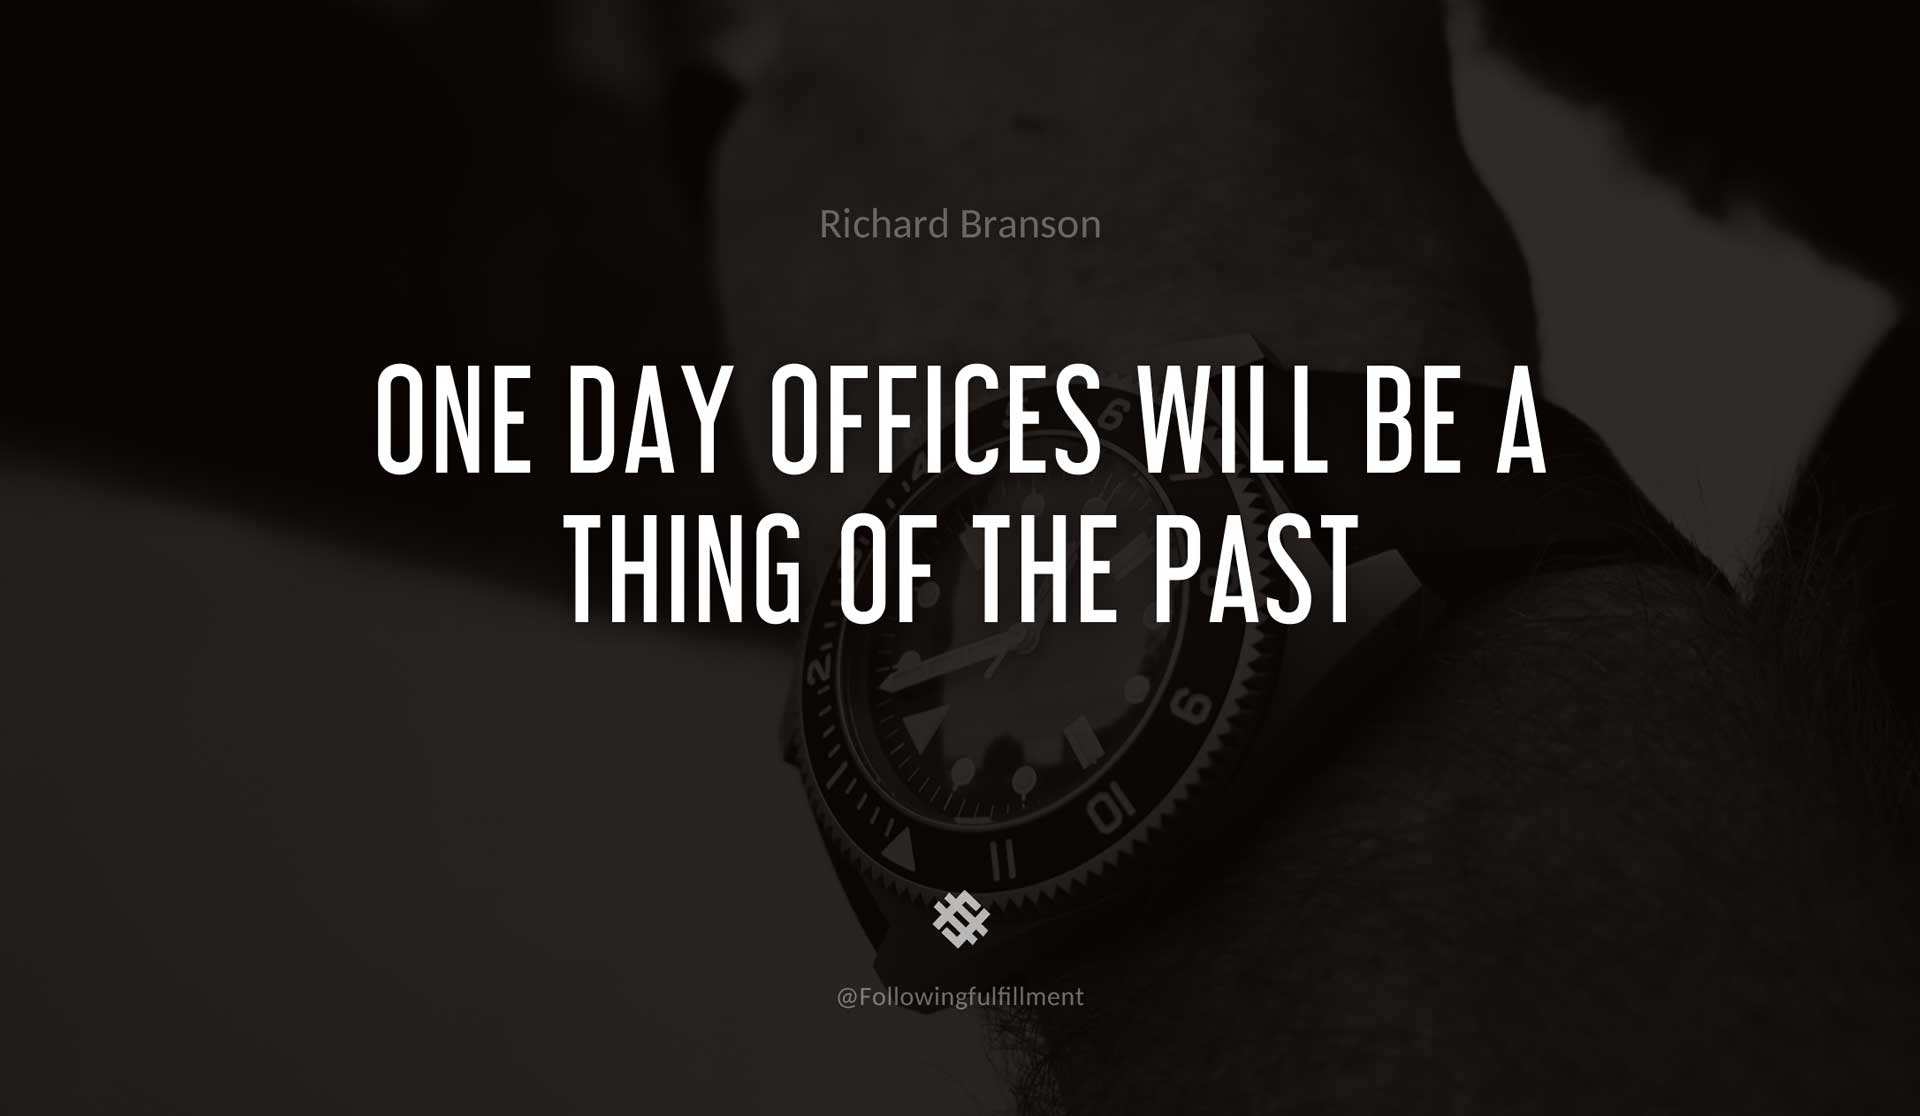 One-day-offices-will-be-a-thing-of-the-past-RICHARD-BRANSON-Quote.jpg